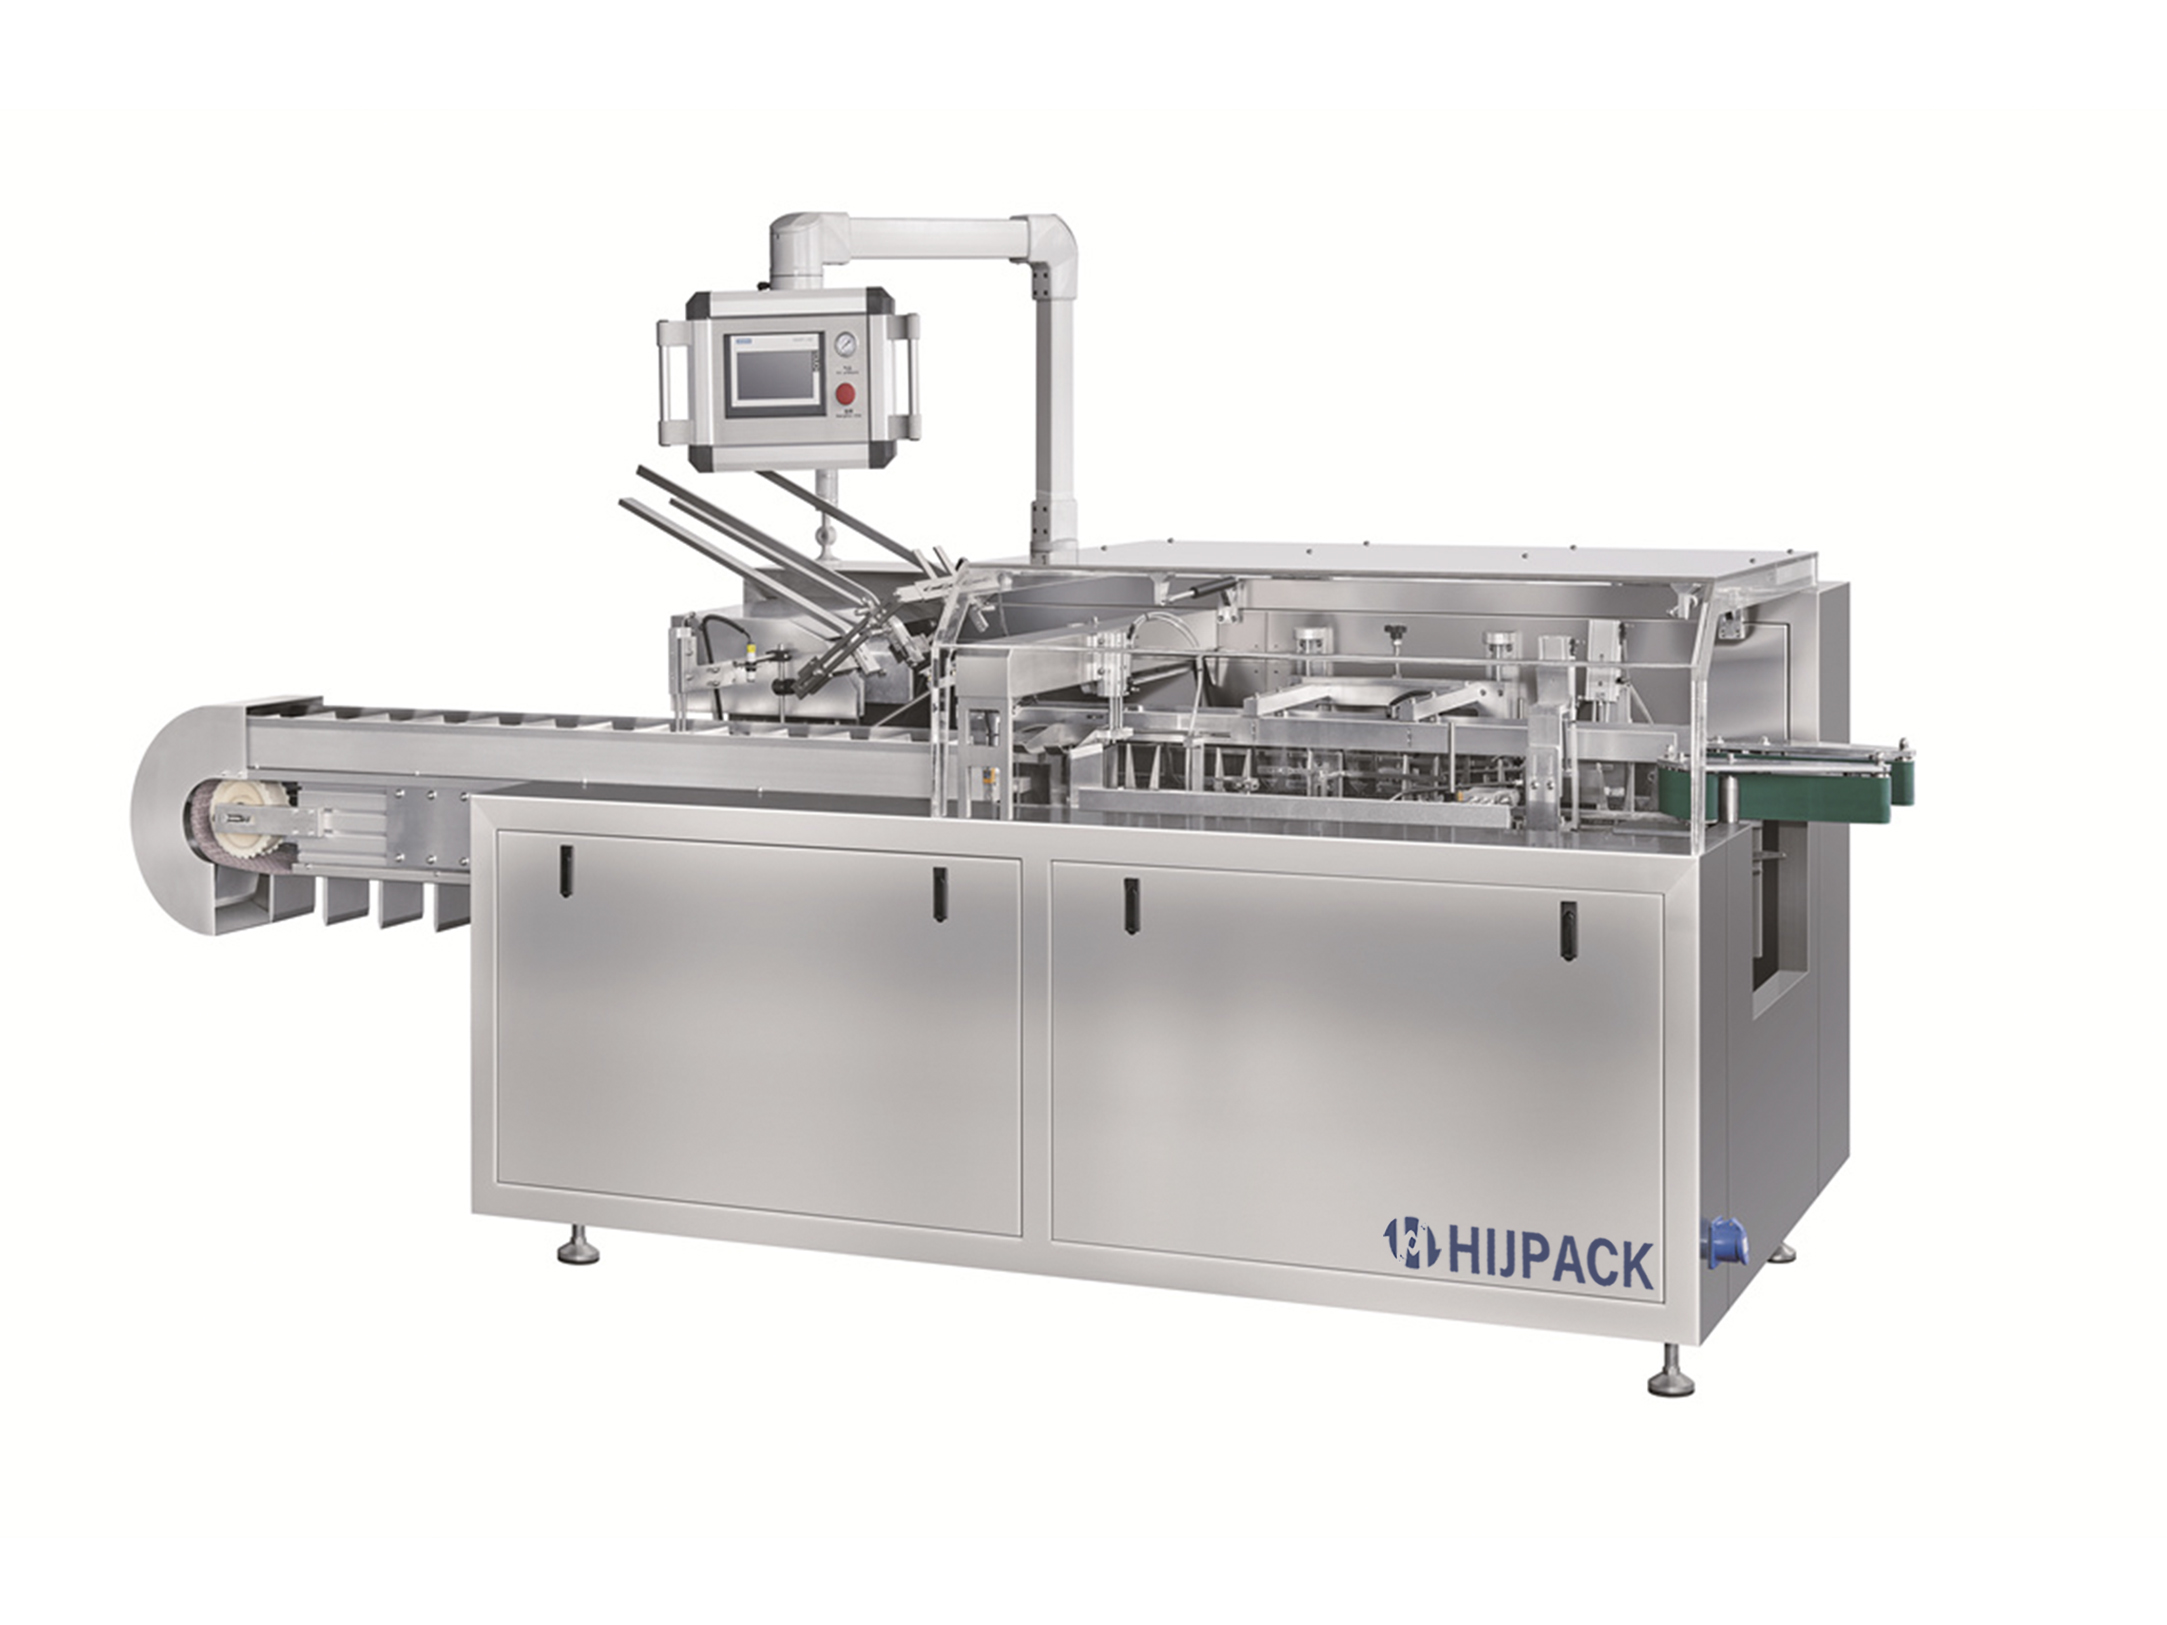 Automatic Cartoning Machine – Streamline Packaging Processes